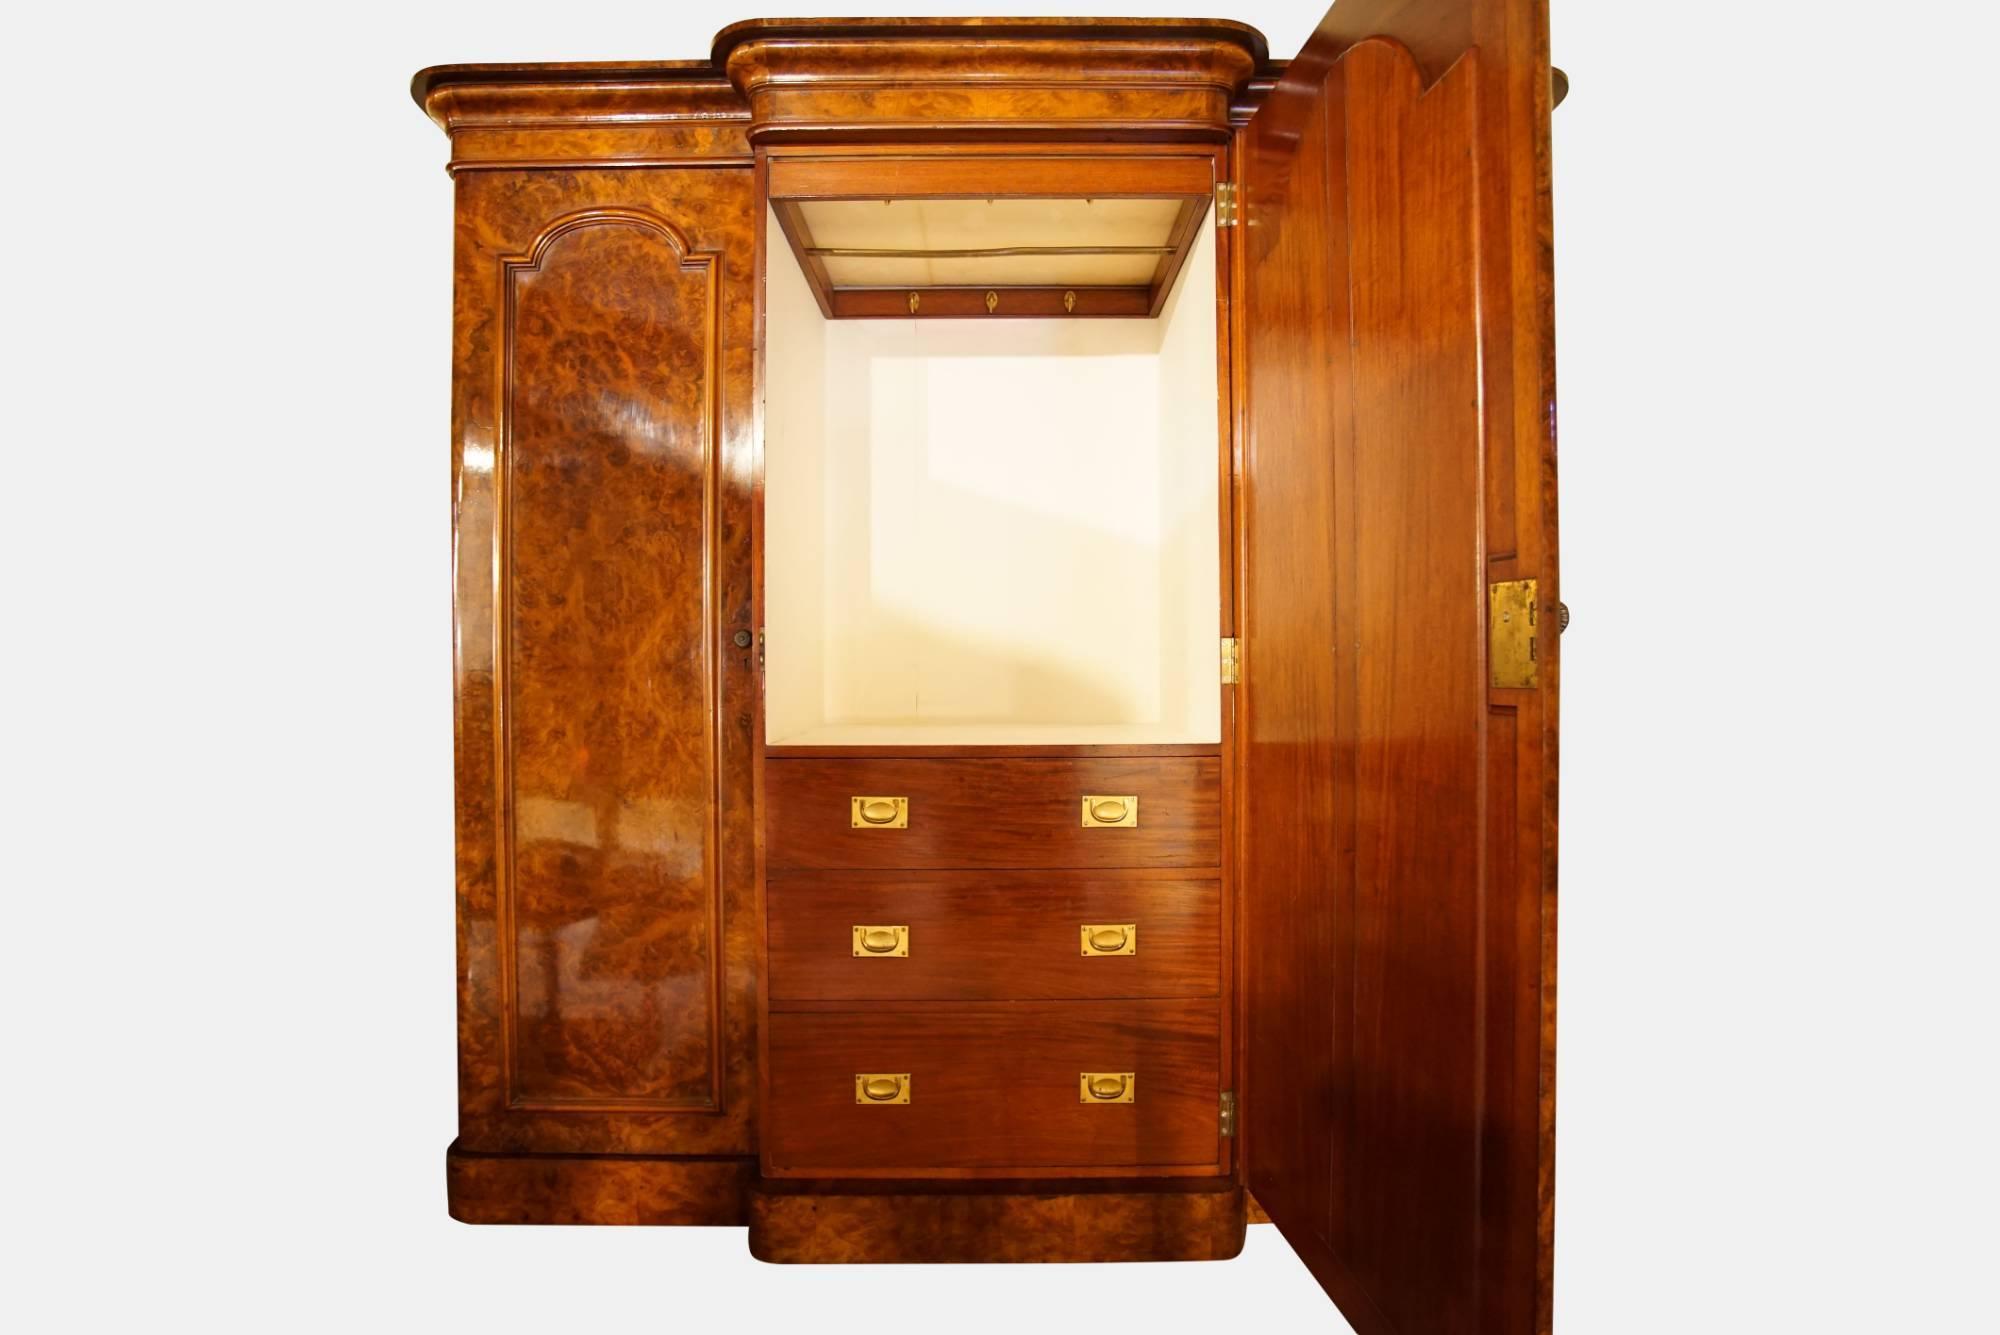 Beautiful Victorian walnut three-door breakfront wardrobe with molded cornice and plain plinth base. The central mirrored door encloses a fitted interior - a bank of three drawers below a pull out hanging rail. The left and right doors enclose a